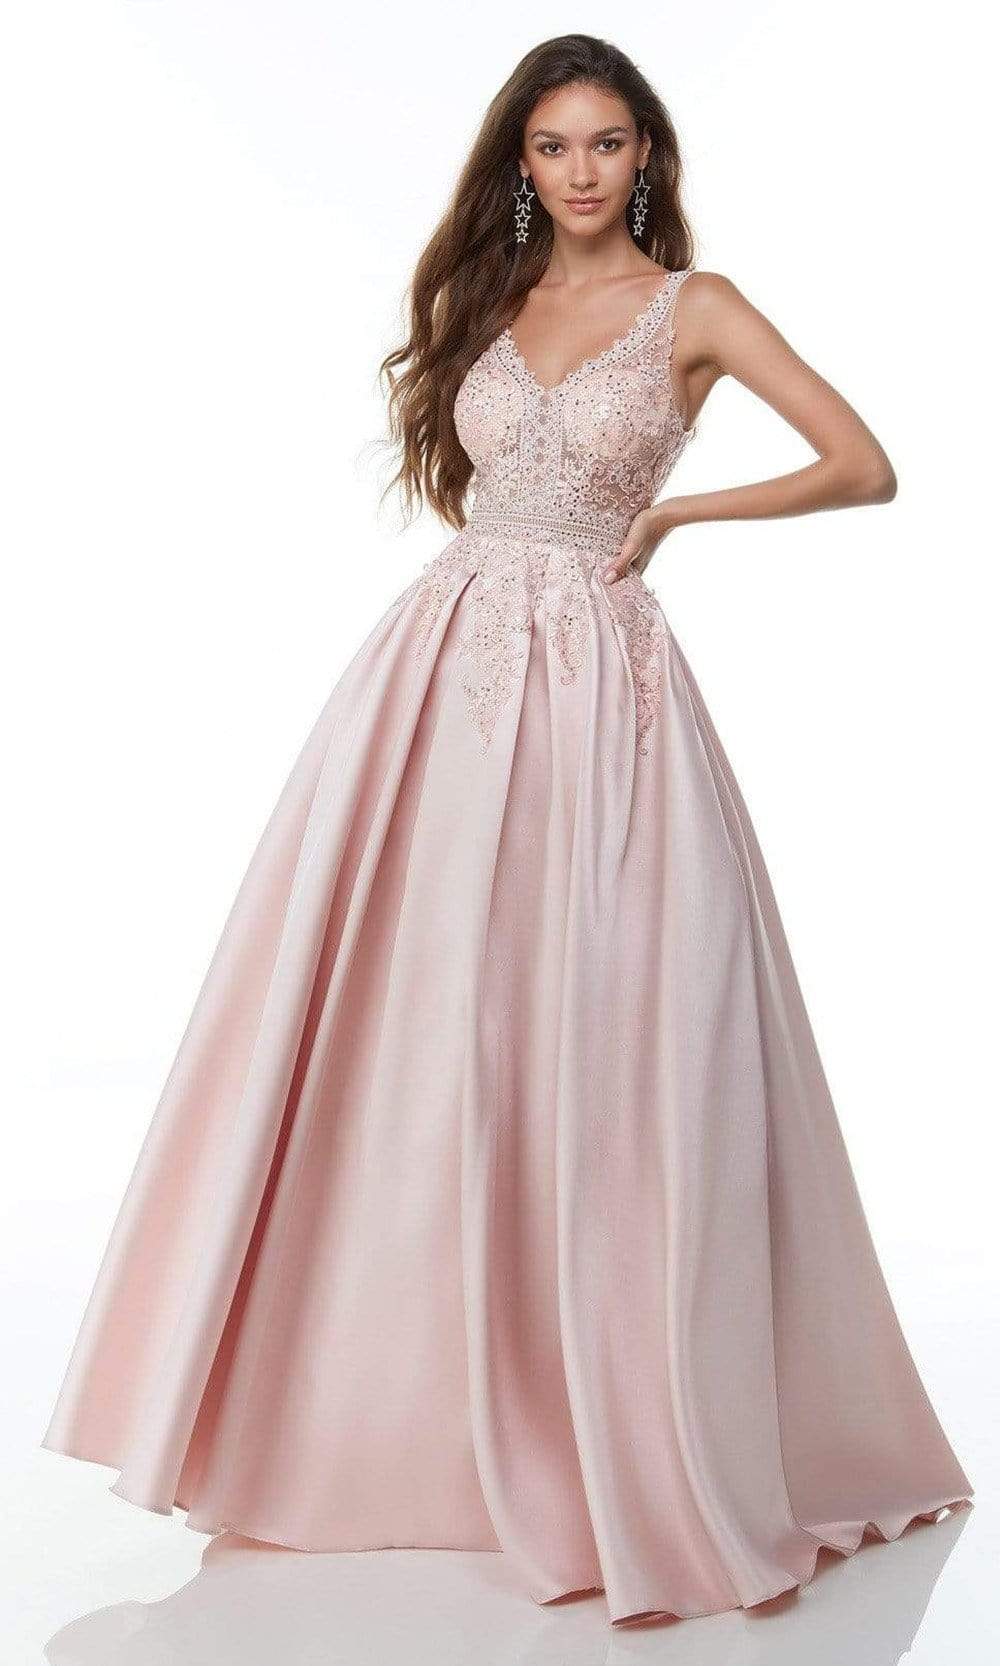 Alyce Paris - 61080 Floral V-Neck Mikado Ballgown Formal Gowns 000 / French Pink